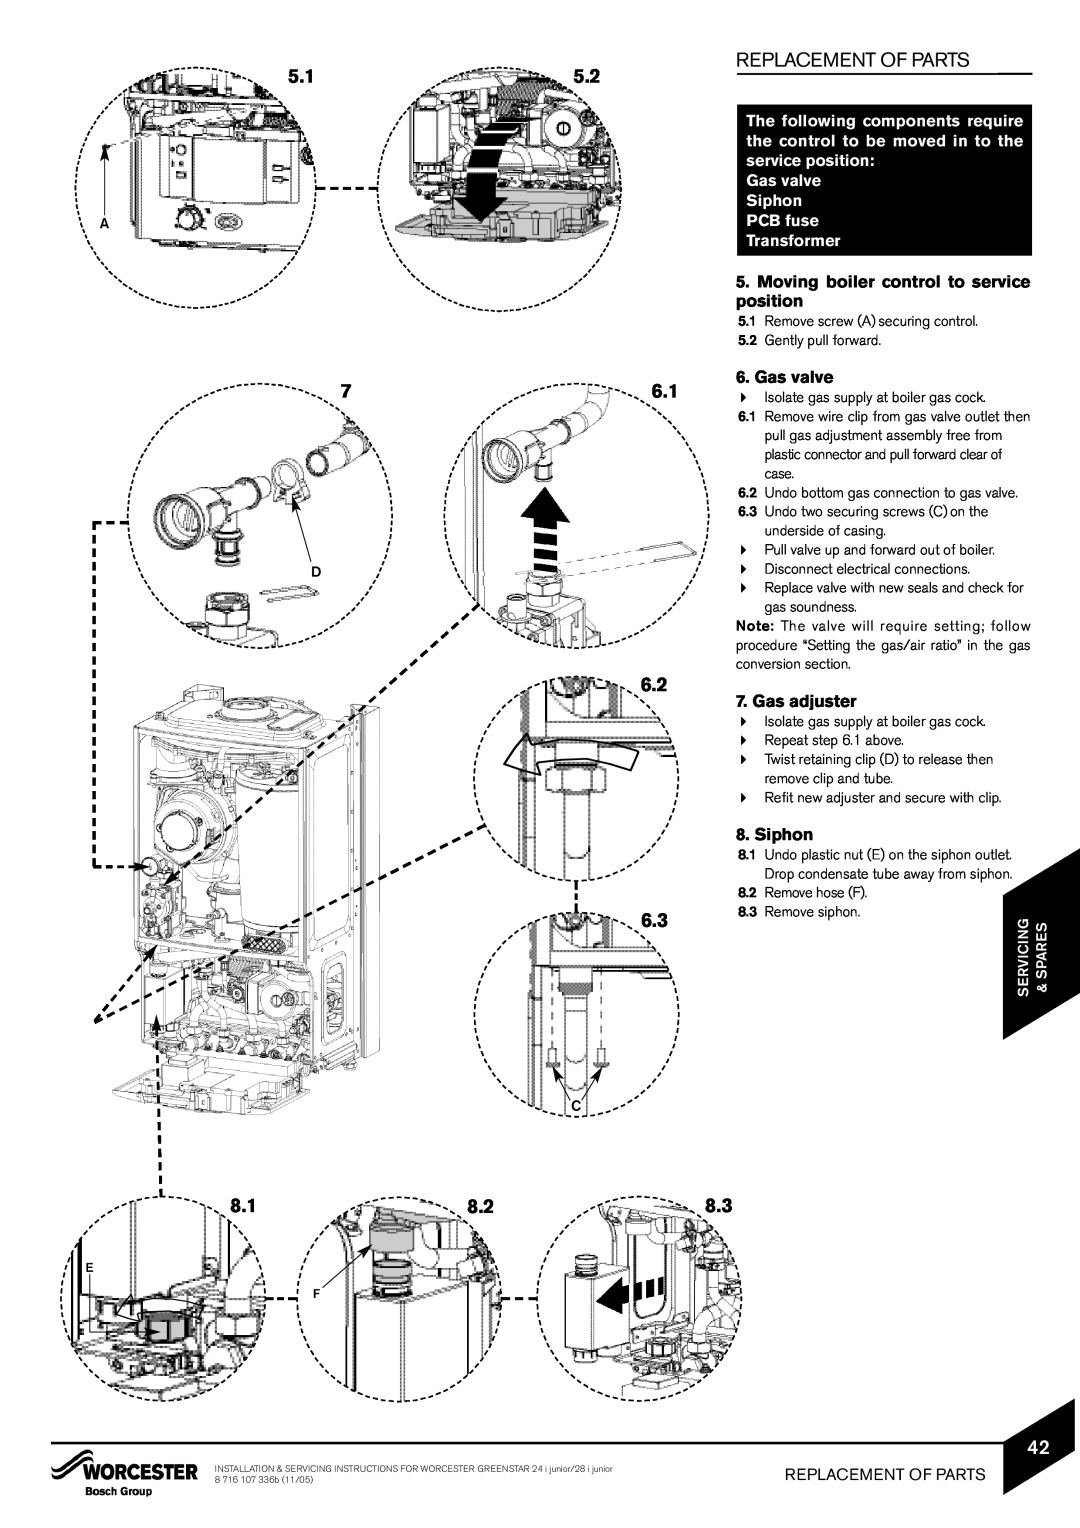 Bosch Appliances 24i junior manual Replacement Of Parts, Moving boiler control to service position, Gas valve, Gas adjuster 